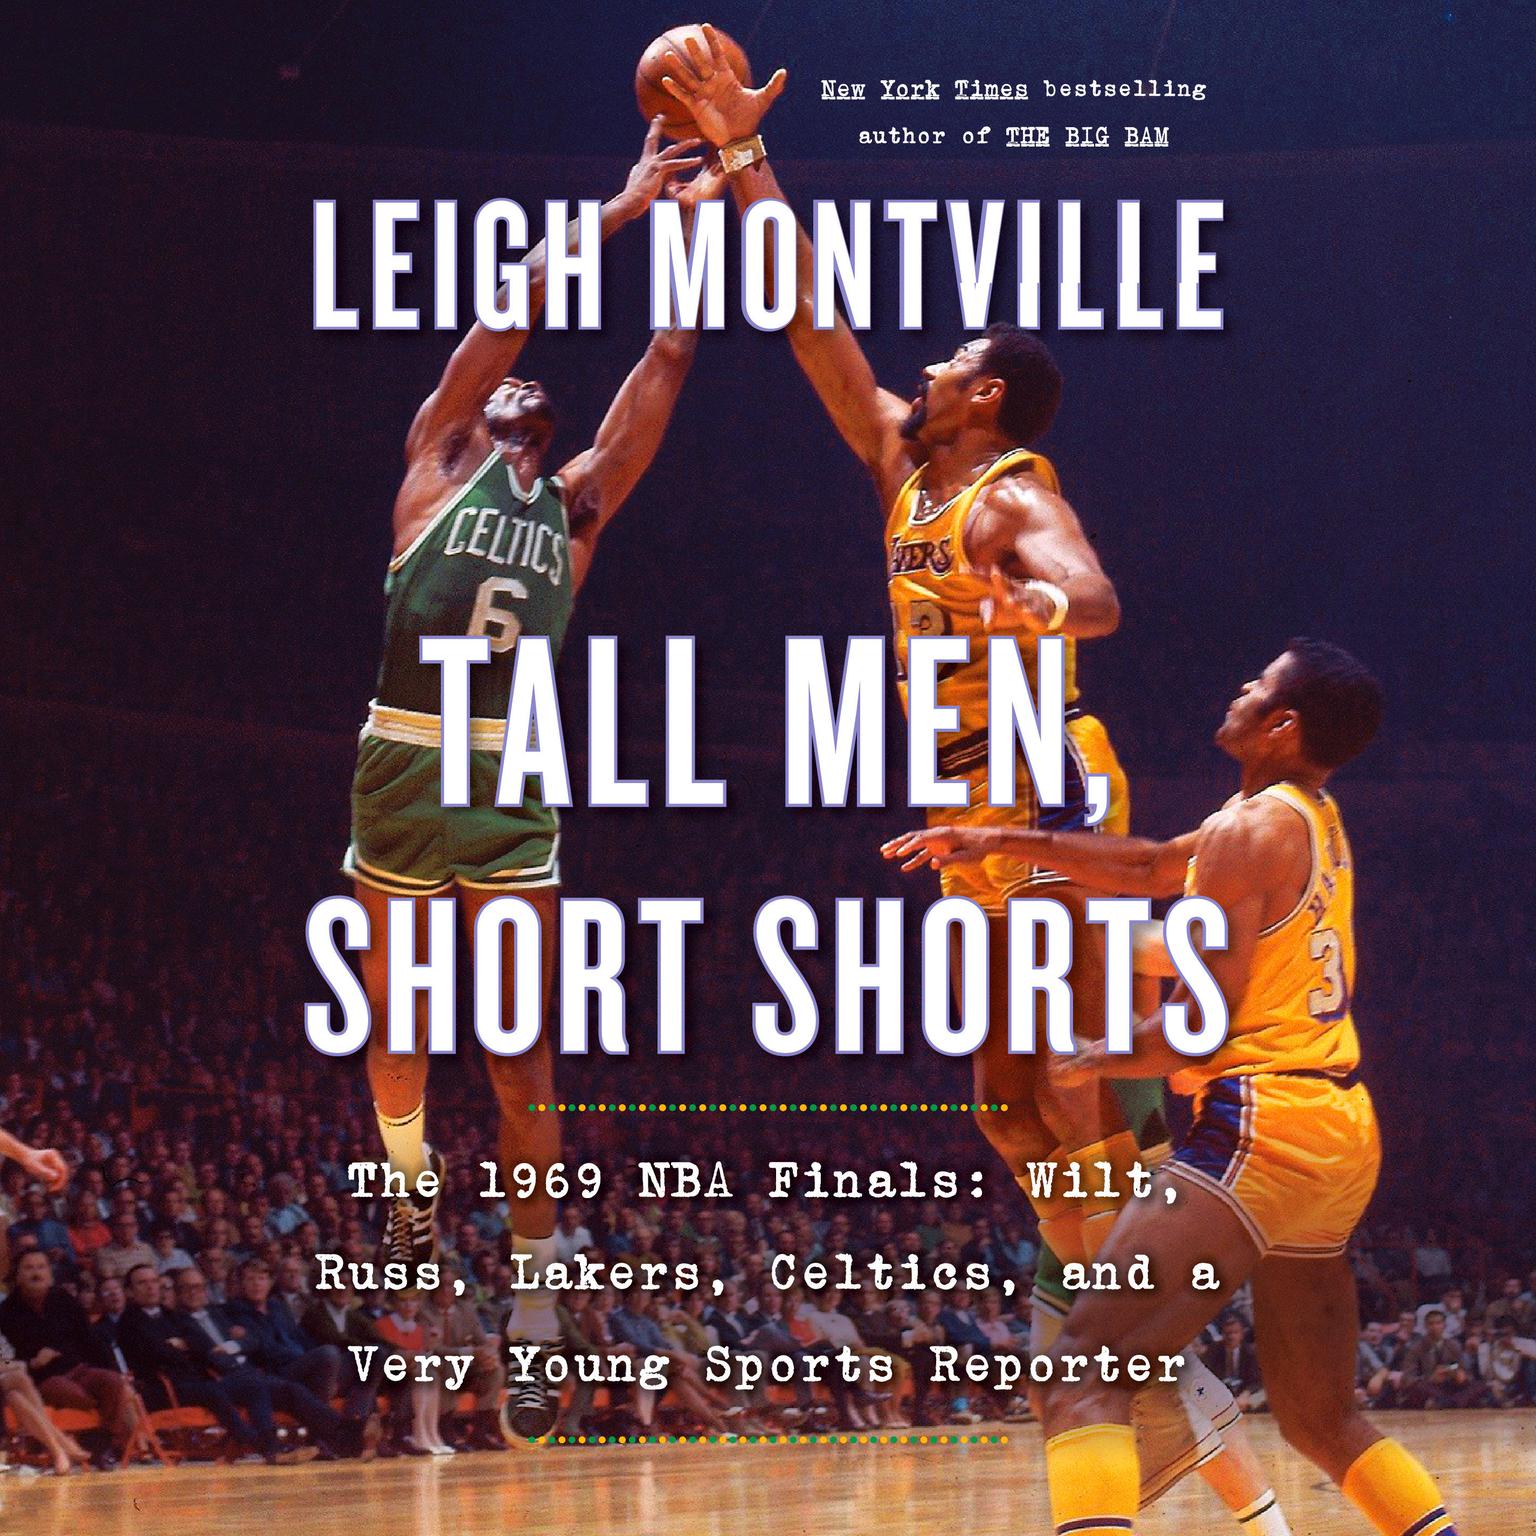 Tall Men, Short Shorts: The 1969 NBA Finals: Wilt, Russ, Lakers, Celtics, and a Very Young Sports Reporter Audiobook, by Leigh Montville